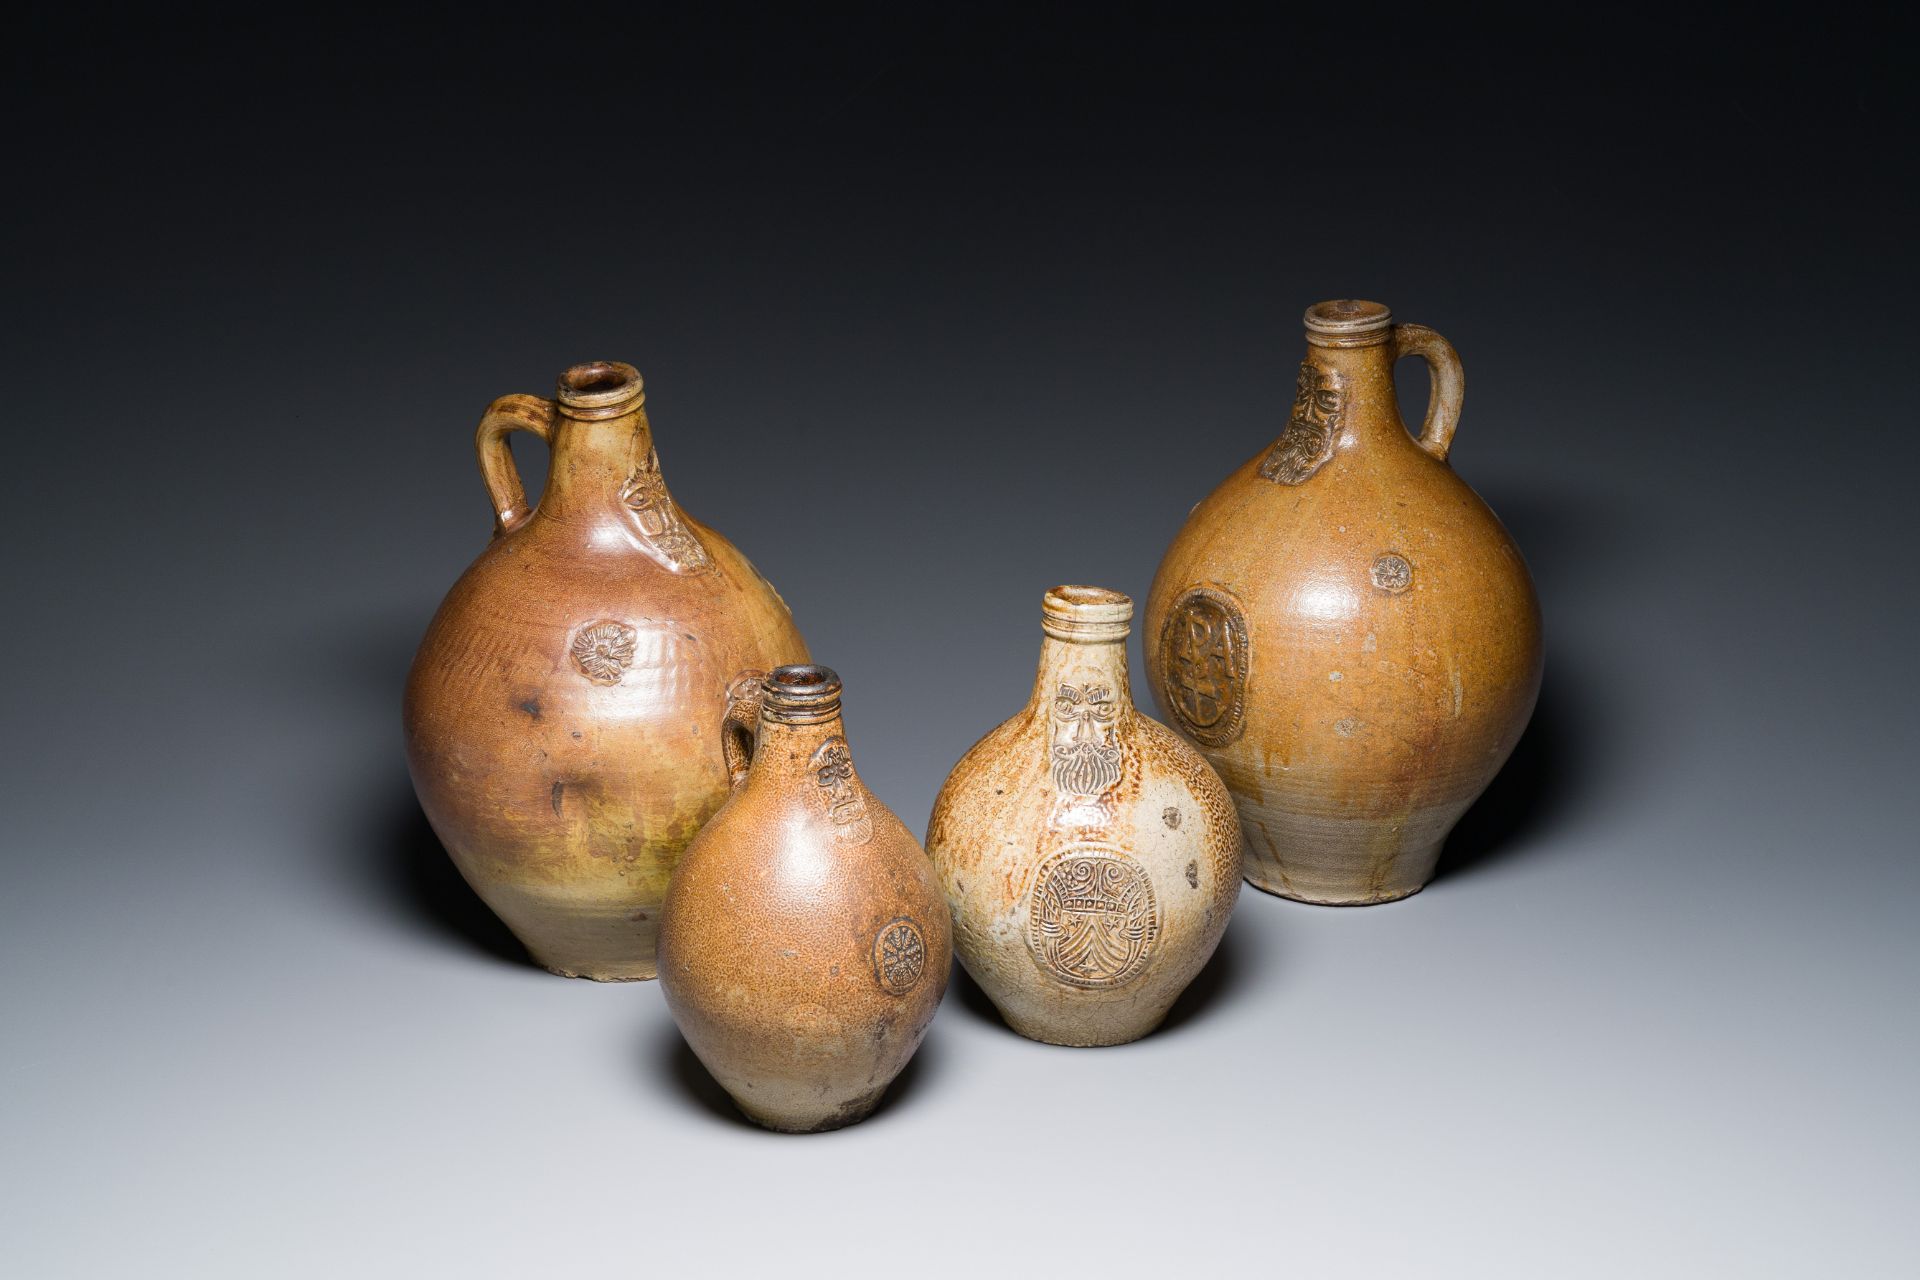 Four stoneware bellarmine jugs with various seals, Frechen and Cologne, Germany, early 17th C.